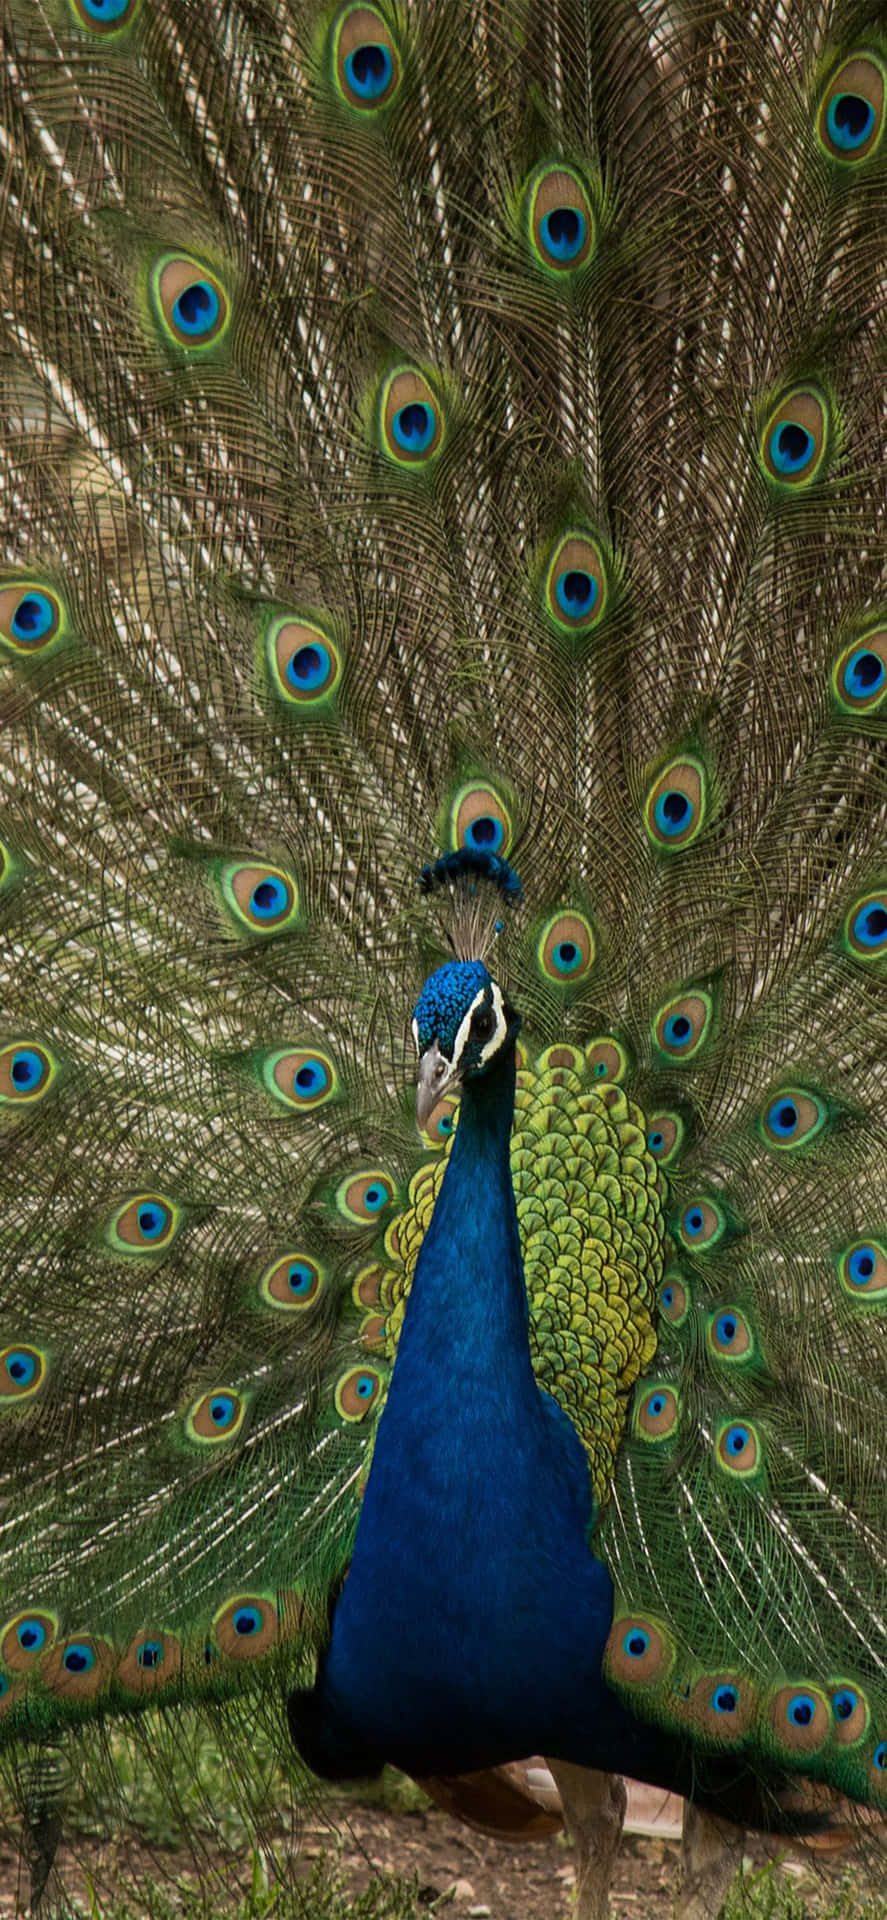 Stunning Display Of A Peacock In Full Bloom